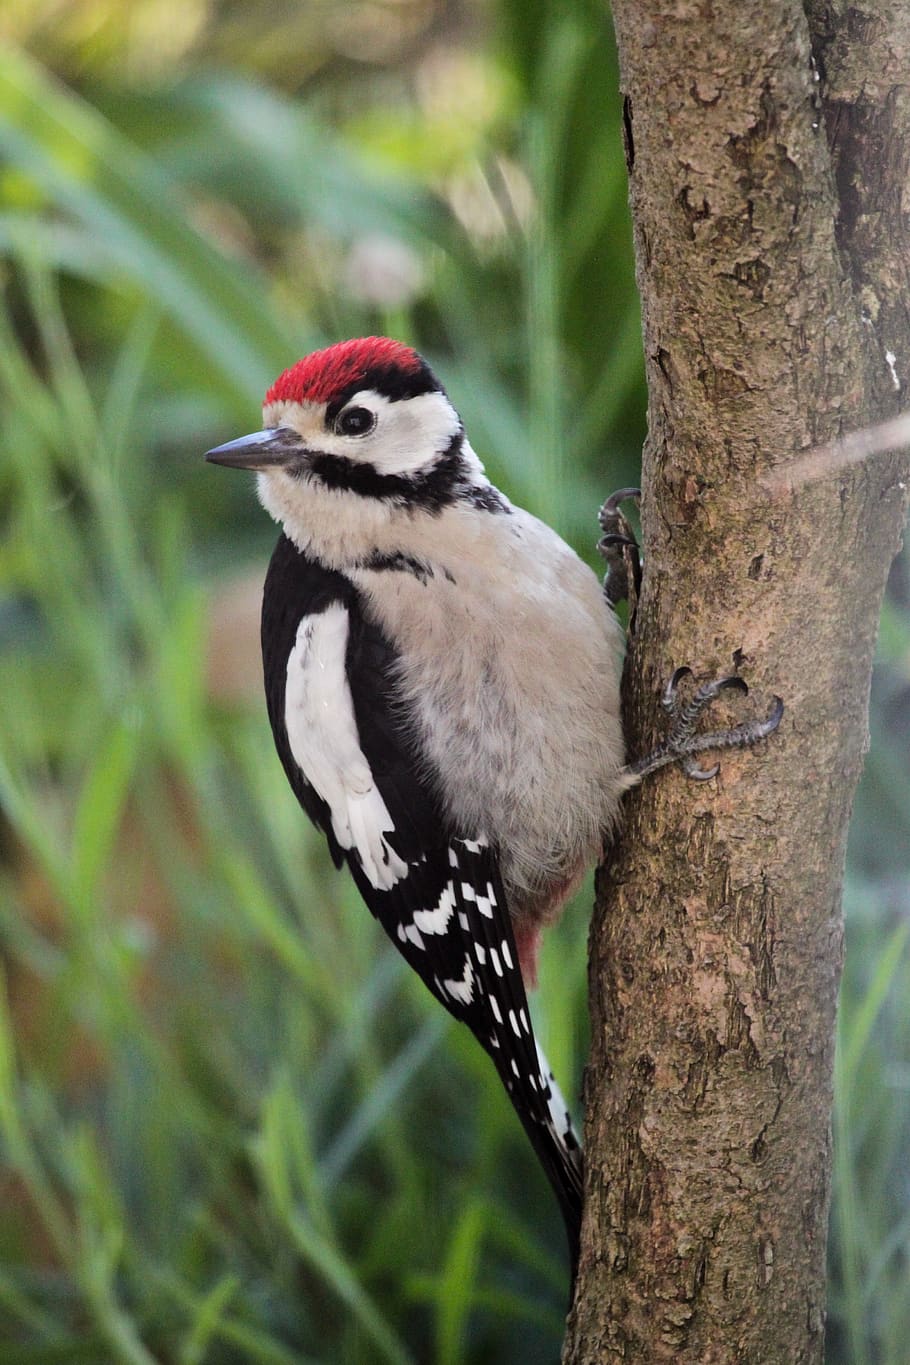 woodpecker, lesser spotted woodpecker, tree, animal, nature, discovered, colorful, sitting, close up, bill